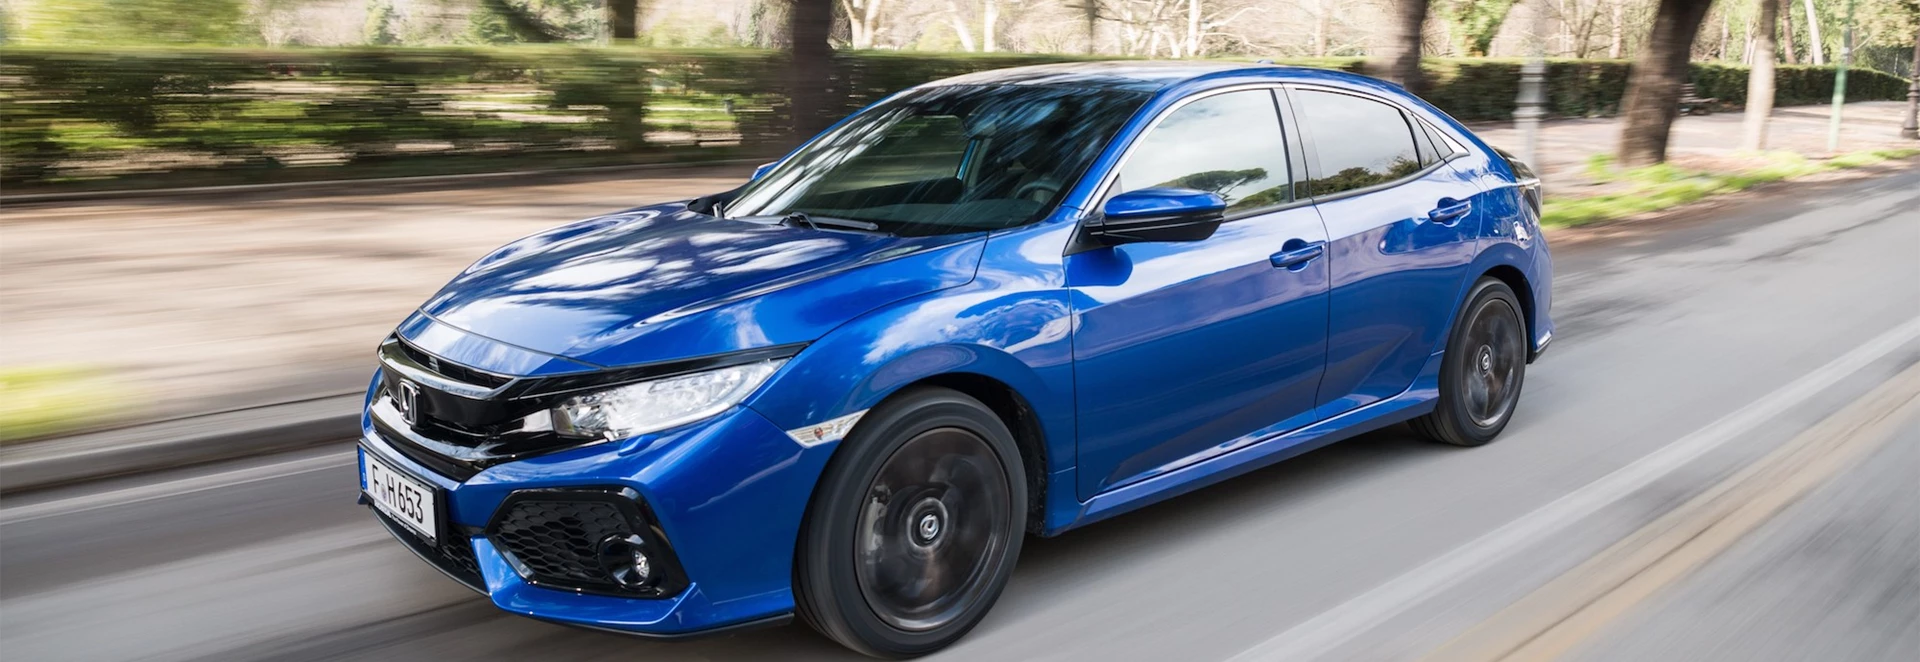 Honda Civic diesel now available with nine-speed auto